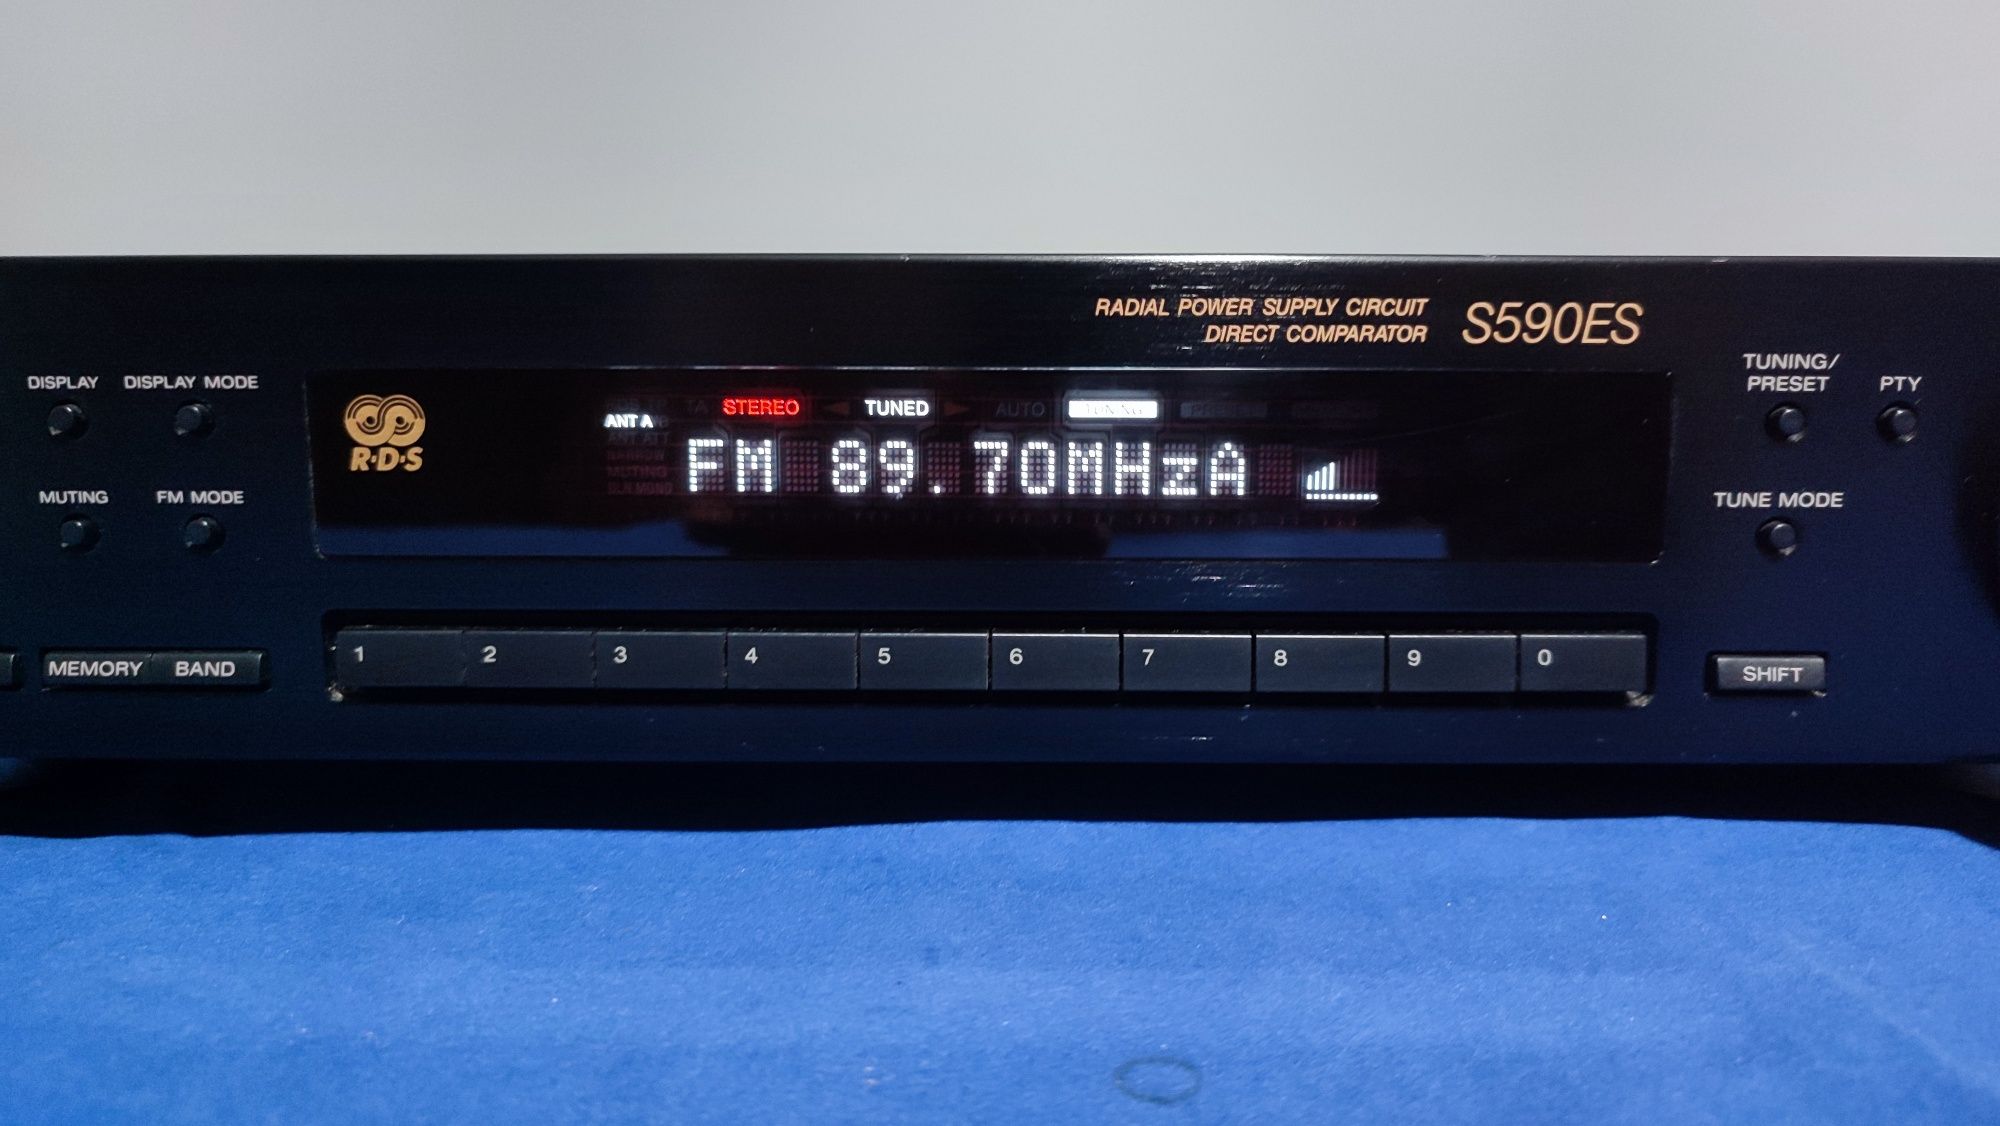 SONY ST-S590ES FM Stereo FM/AM Tuner.